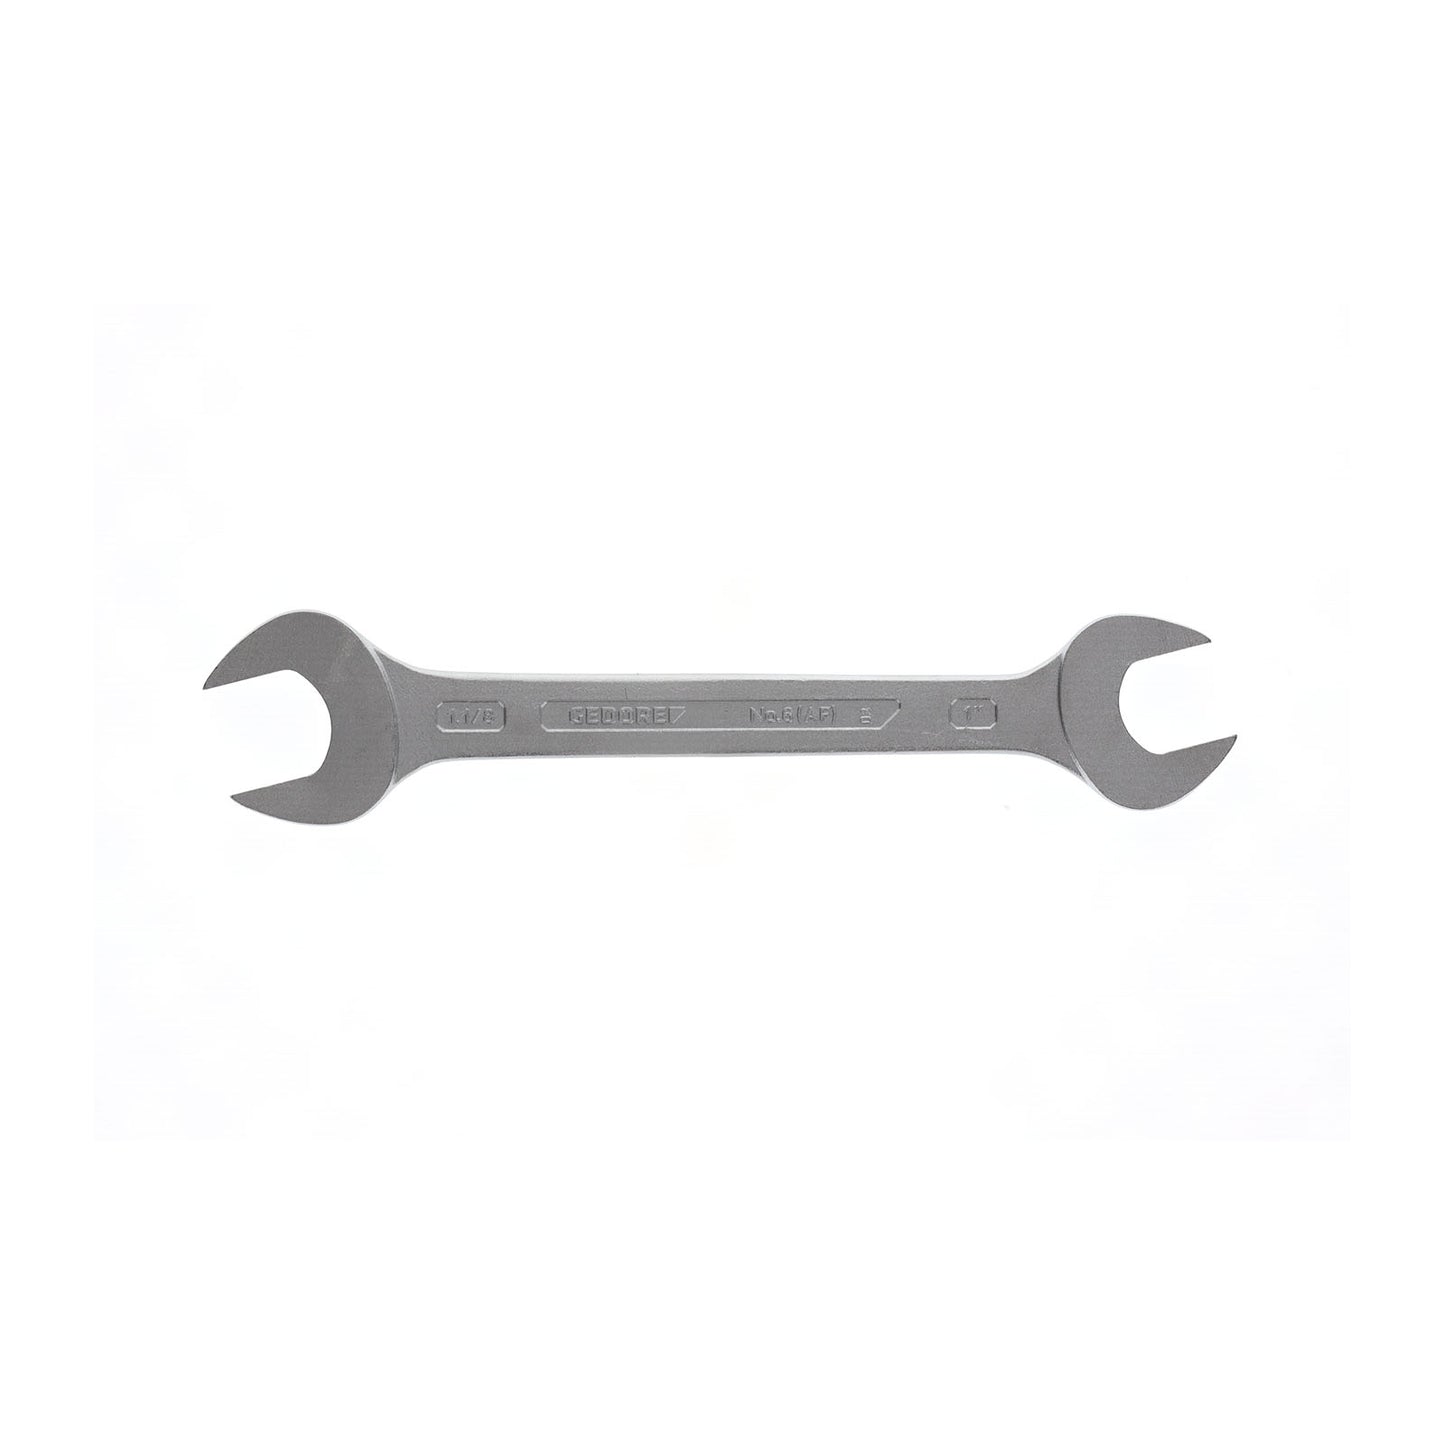 GEDORE 6 1X1.1/8AF - 2-Mount Fixed Wrench, 1x1.1/8AF (6071930)